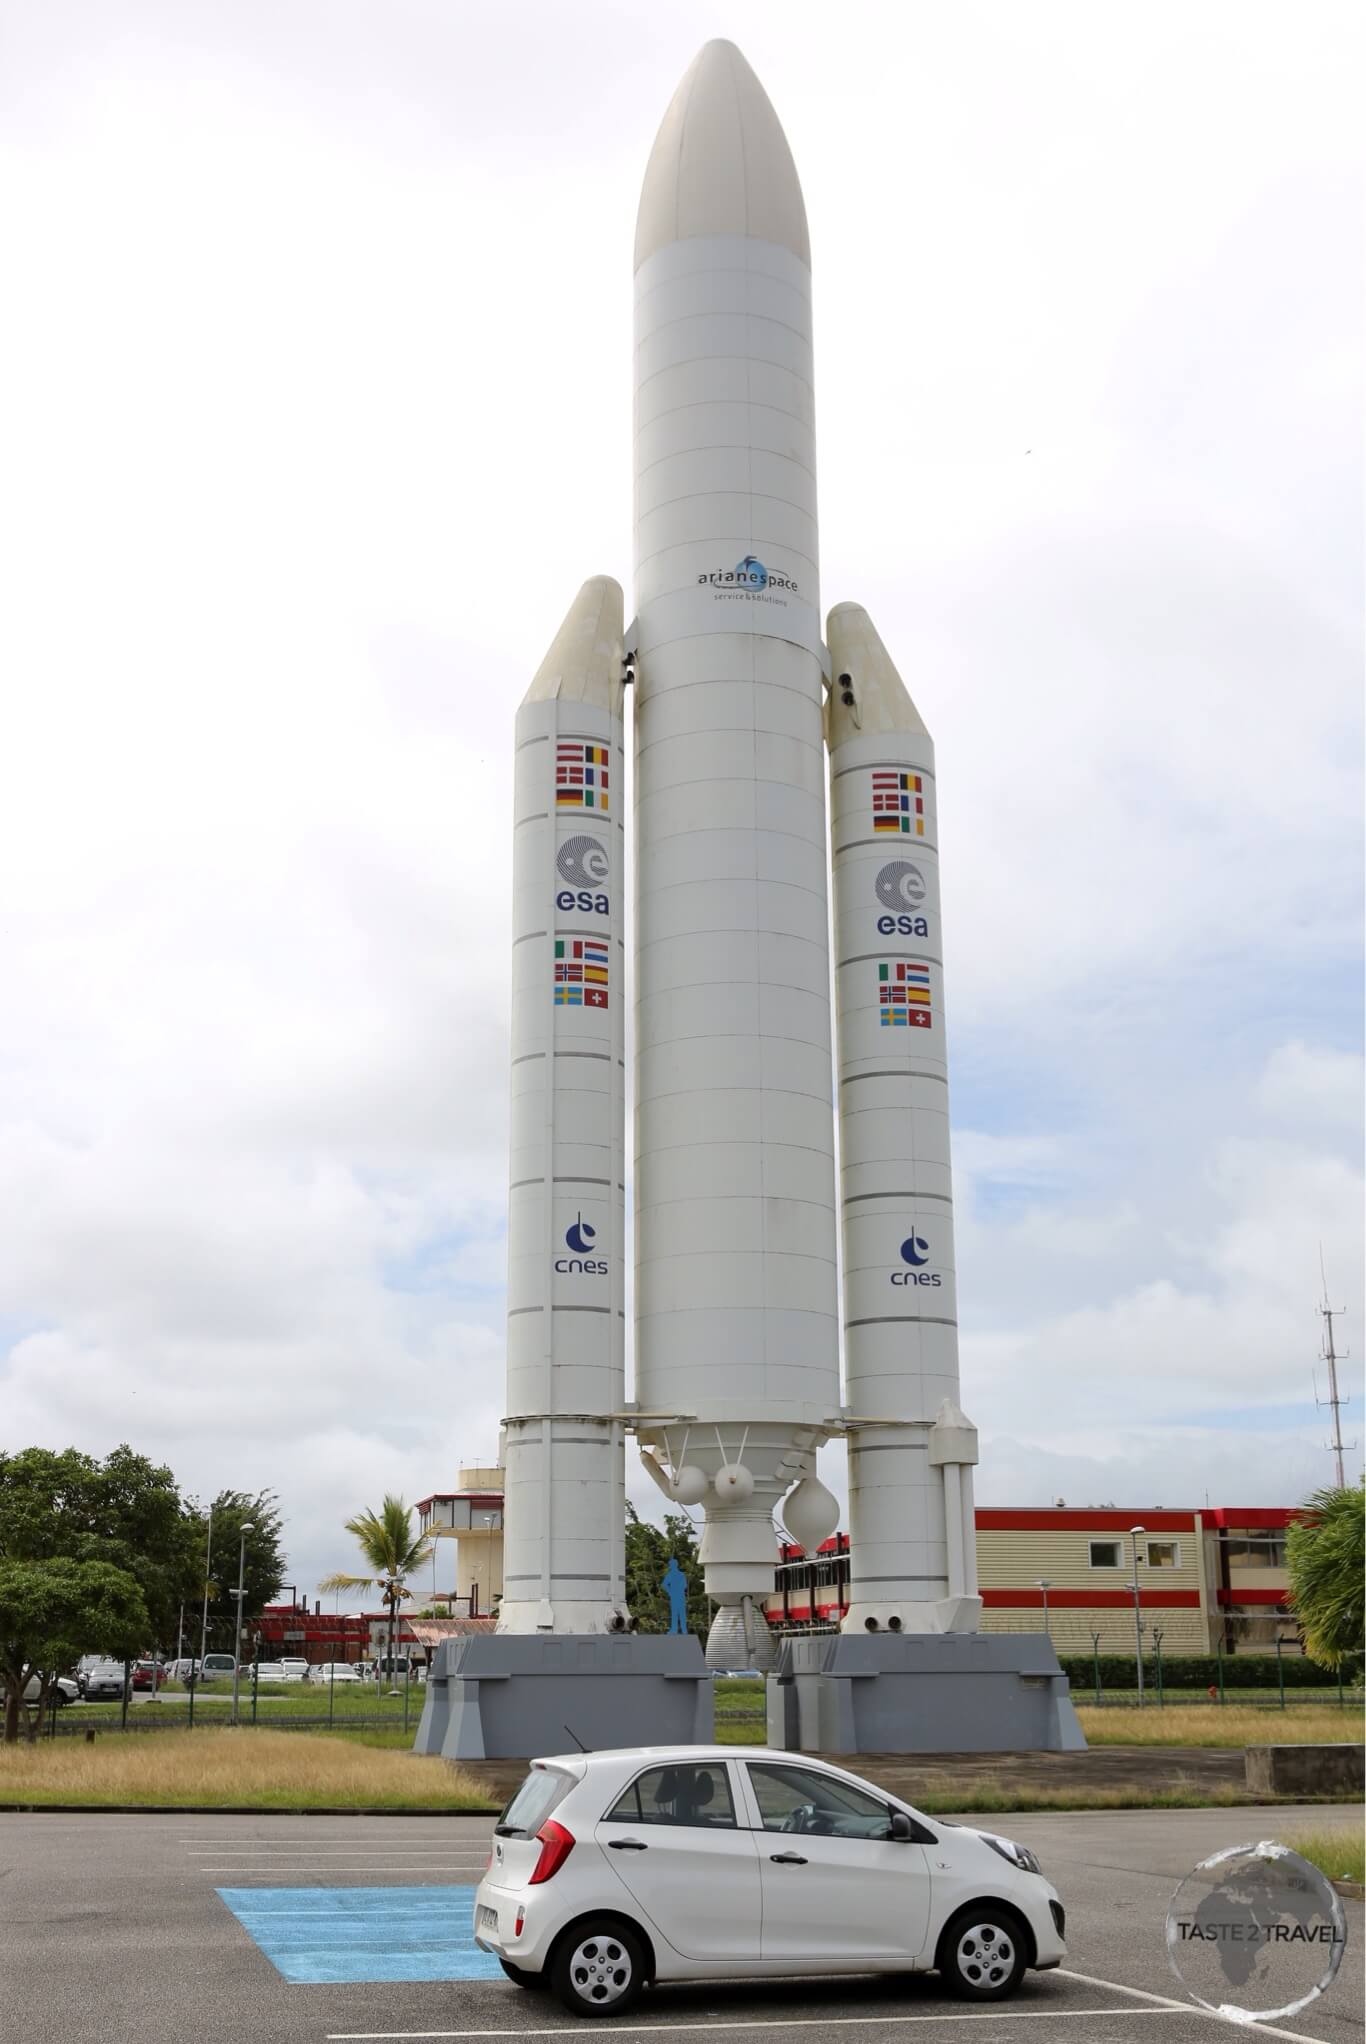 This Ariane rocket can carry a payload of 10t into space - enough to lift my car (foreground) into orbit.